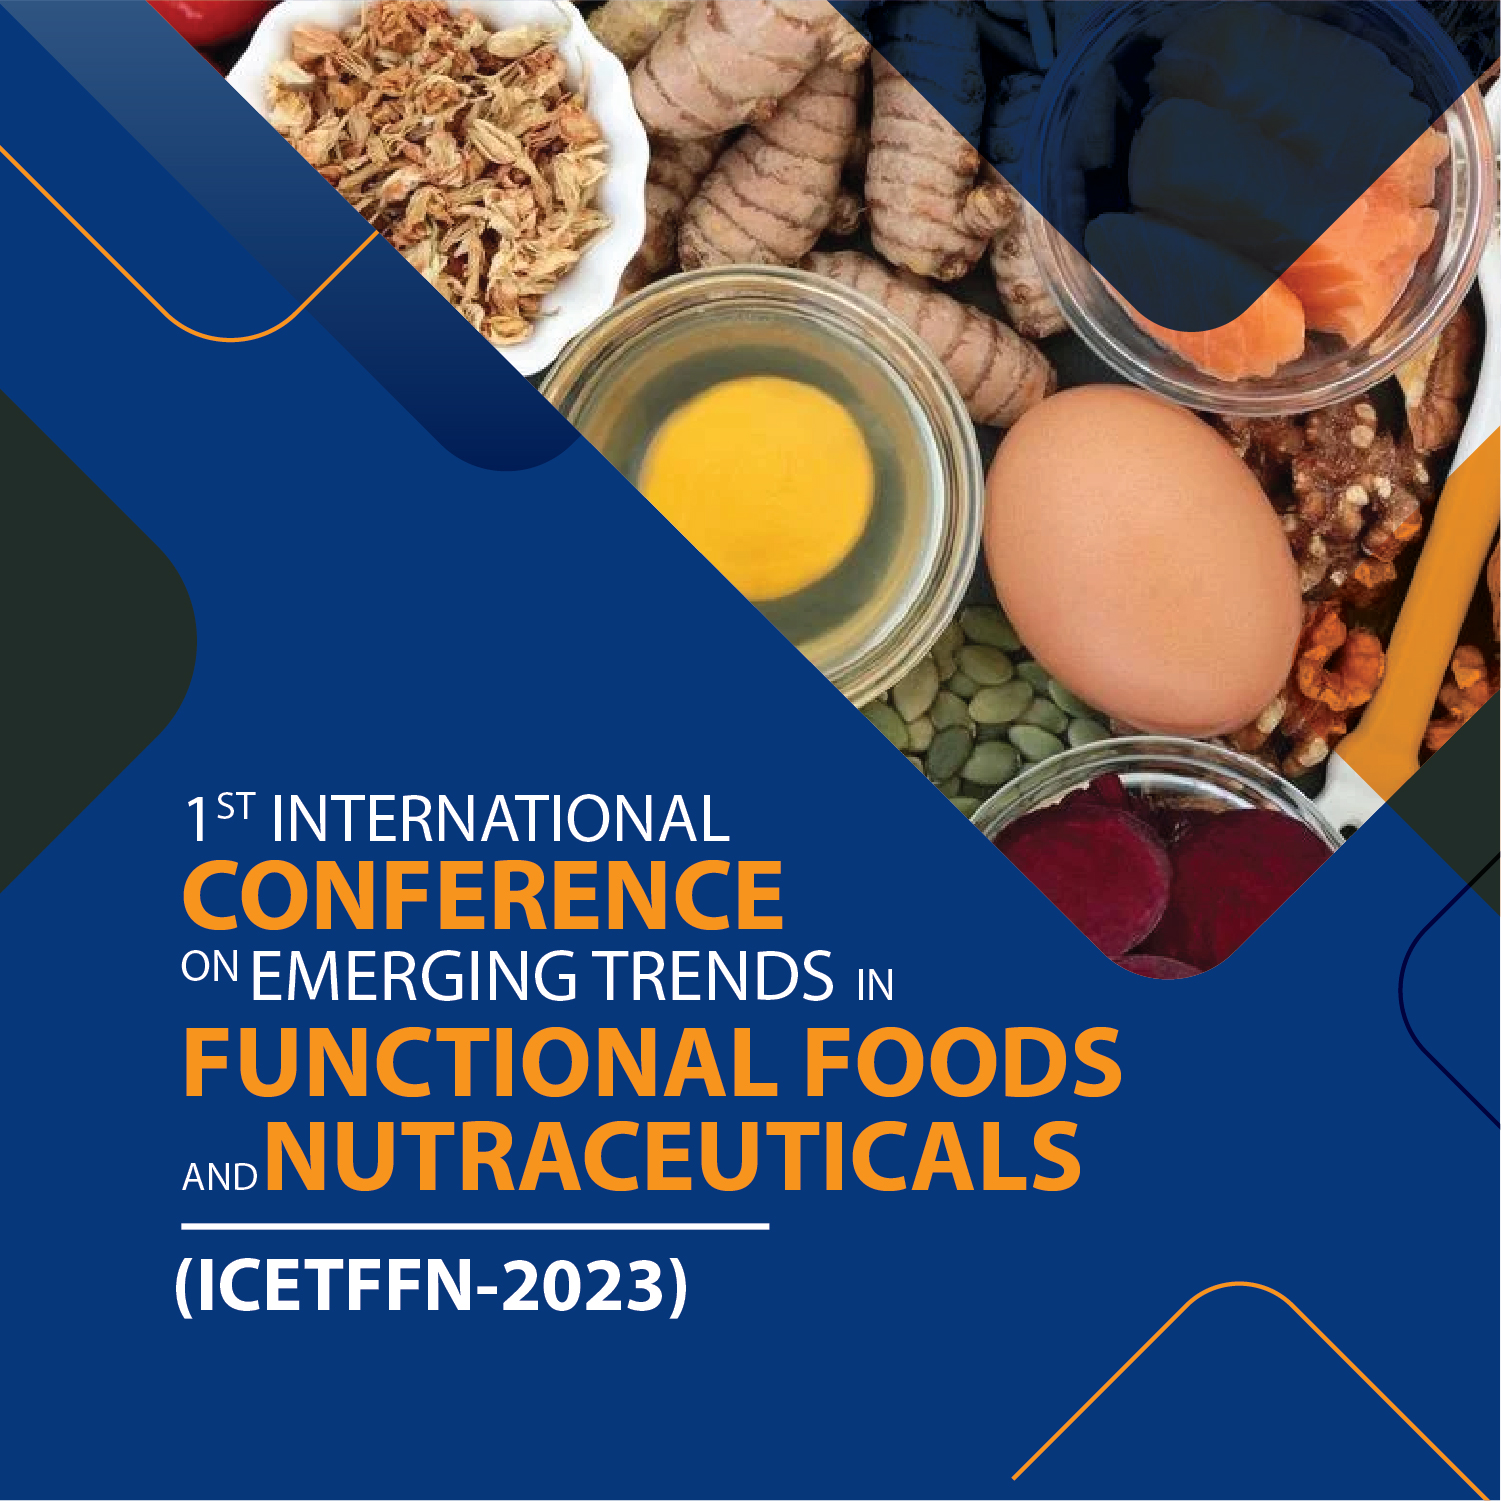 1 st International Conference on Emerging Trends in Functional Foods and Nutraceuticals